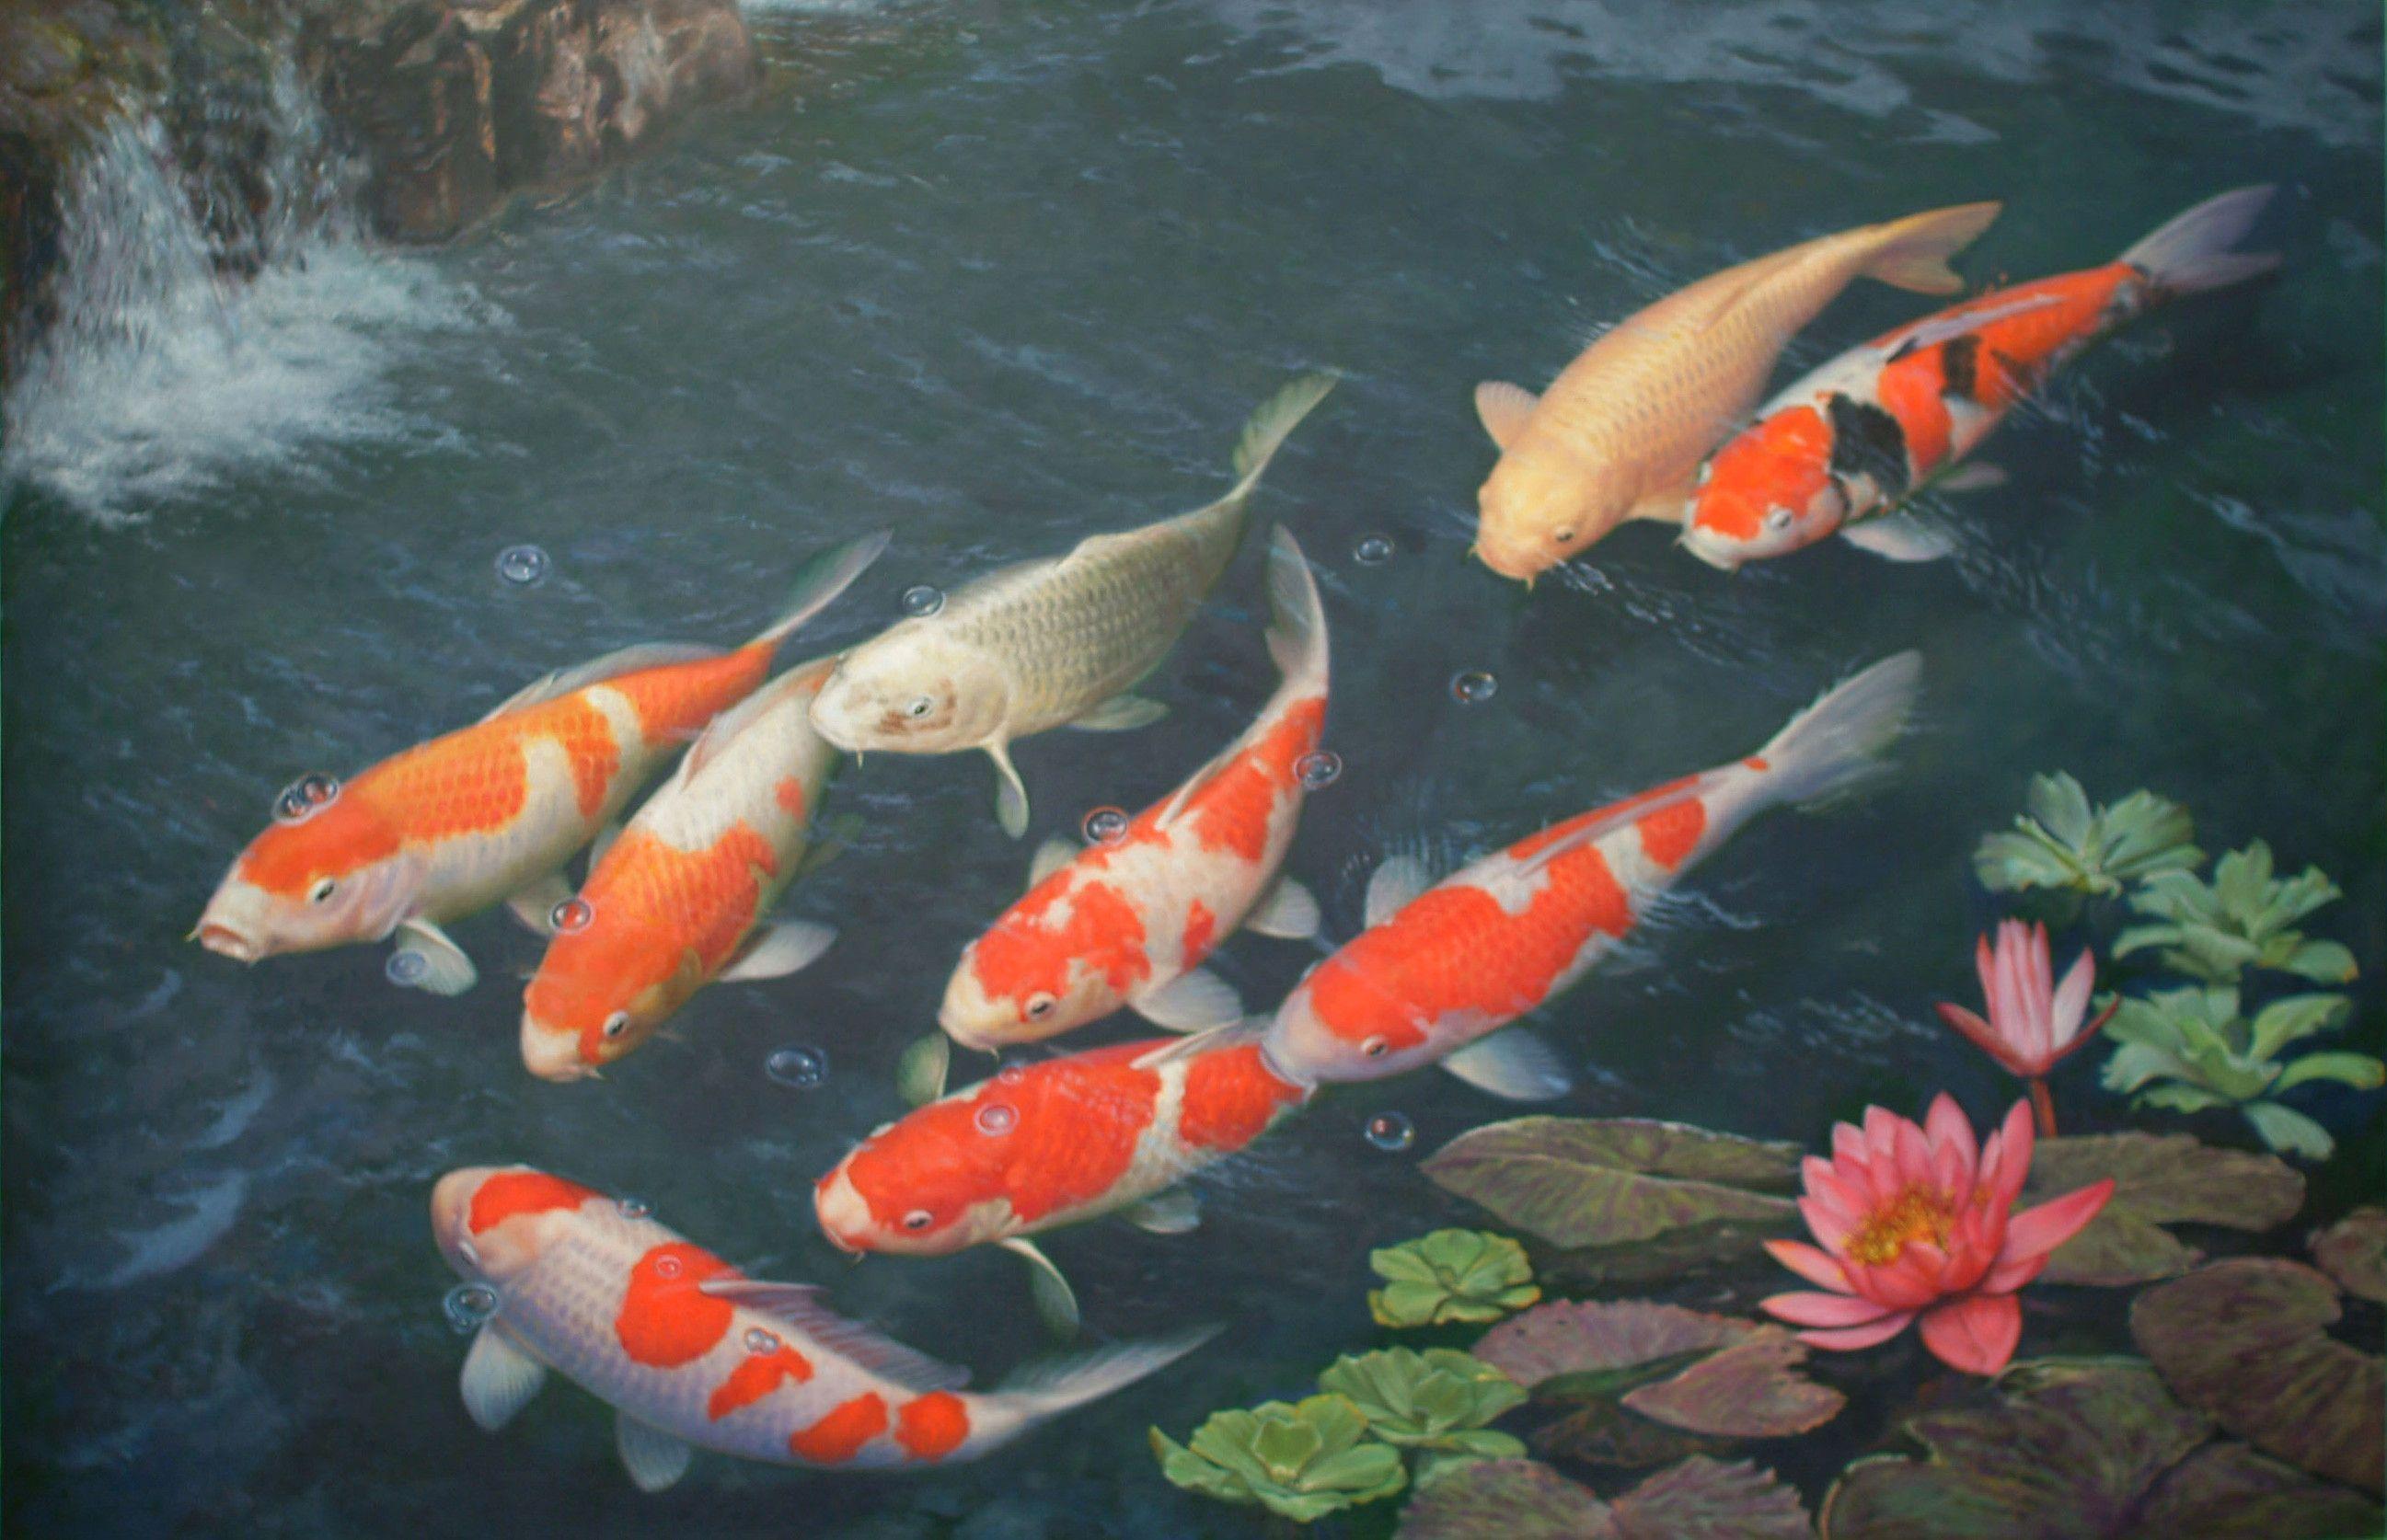 Koi fishes on the surface photo and wallpaper. Cute Koi fishes